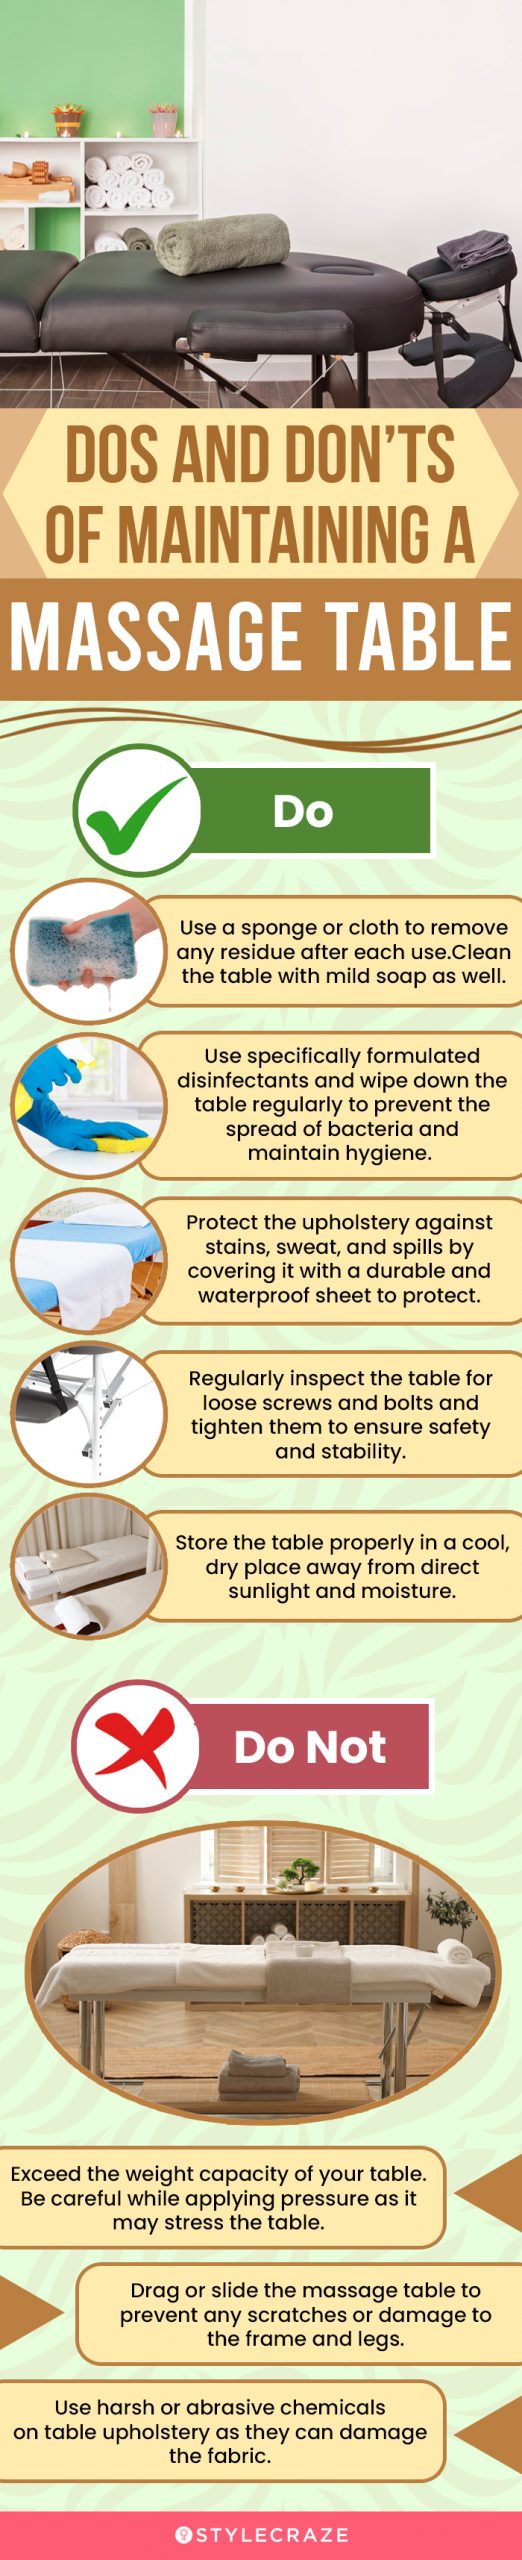 Dos and Don’ts Of Maintaining A Massage Table (infographic)